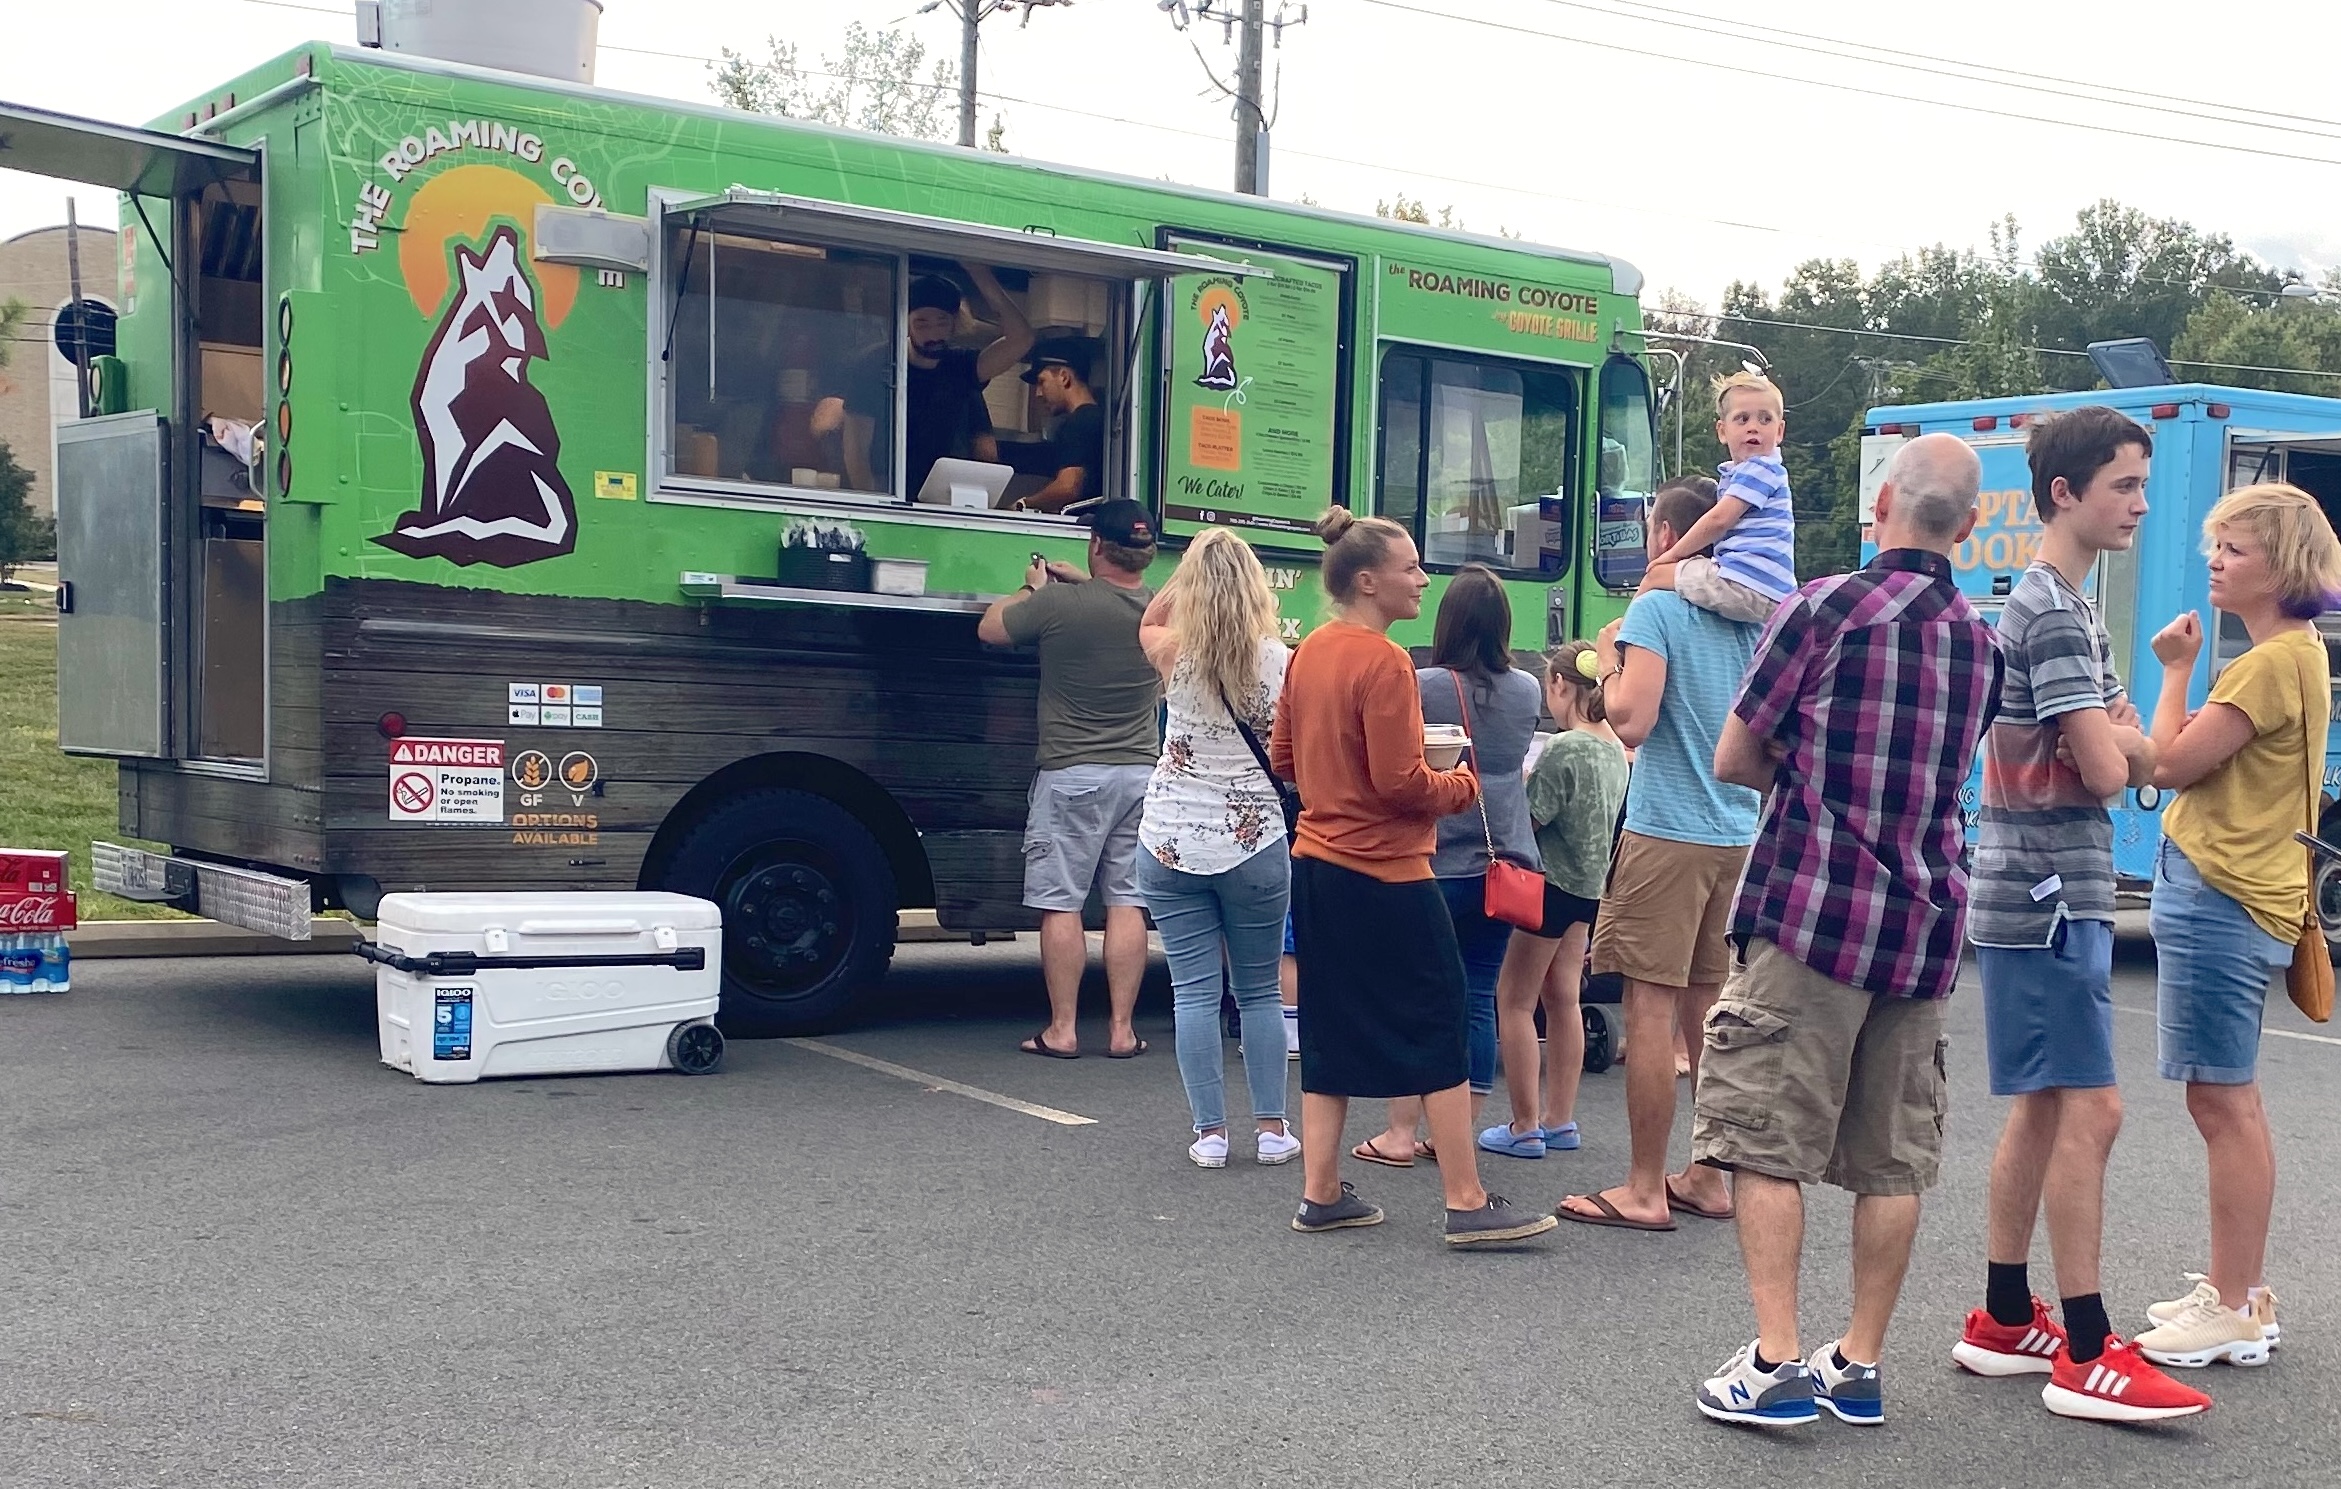 Green Roaming Coyote food truck with a line of customers